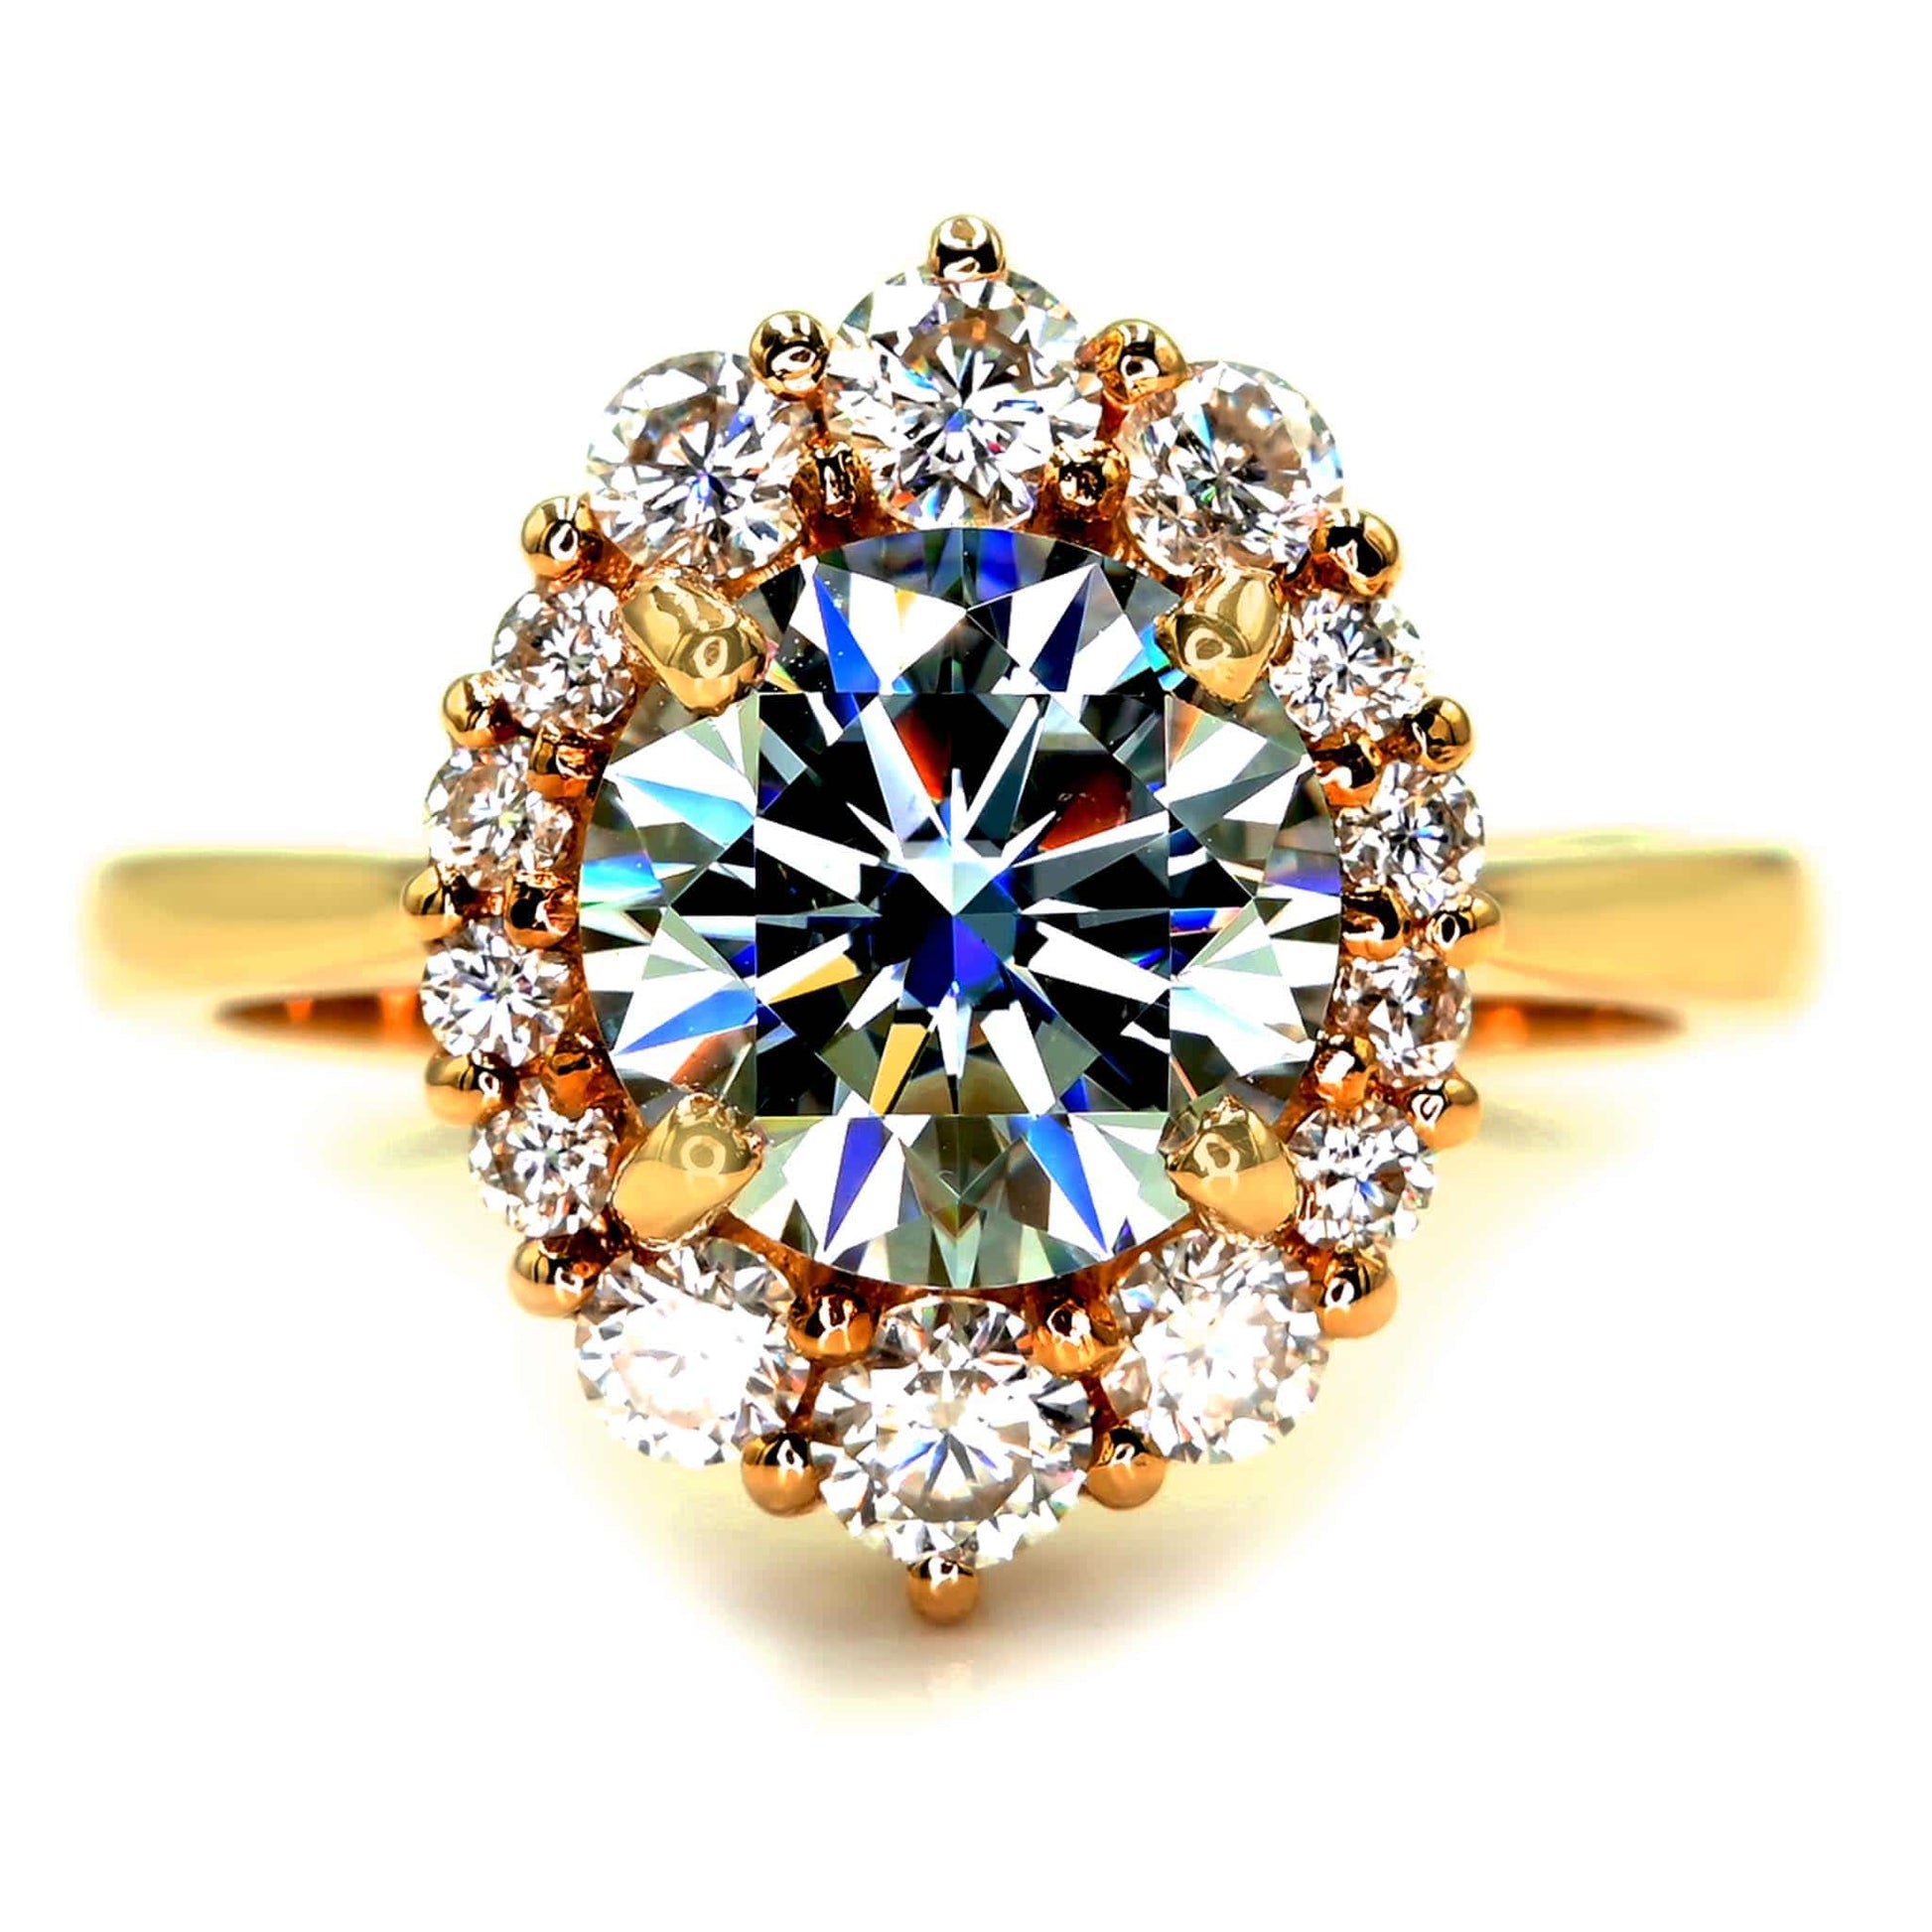 The orion ring with grey moissanite and 18k yellow gold. The handmade moissanite ring is available made-to-order.